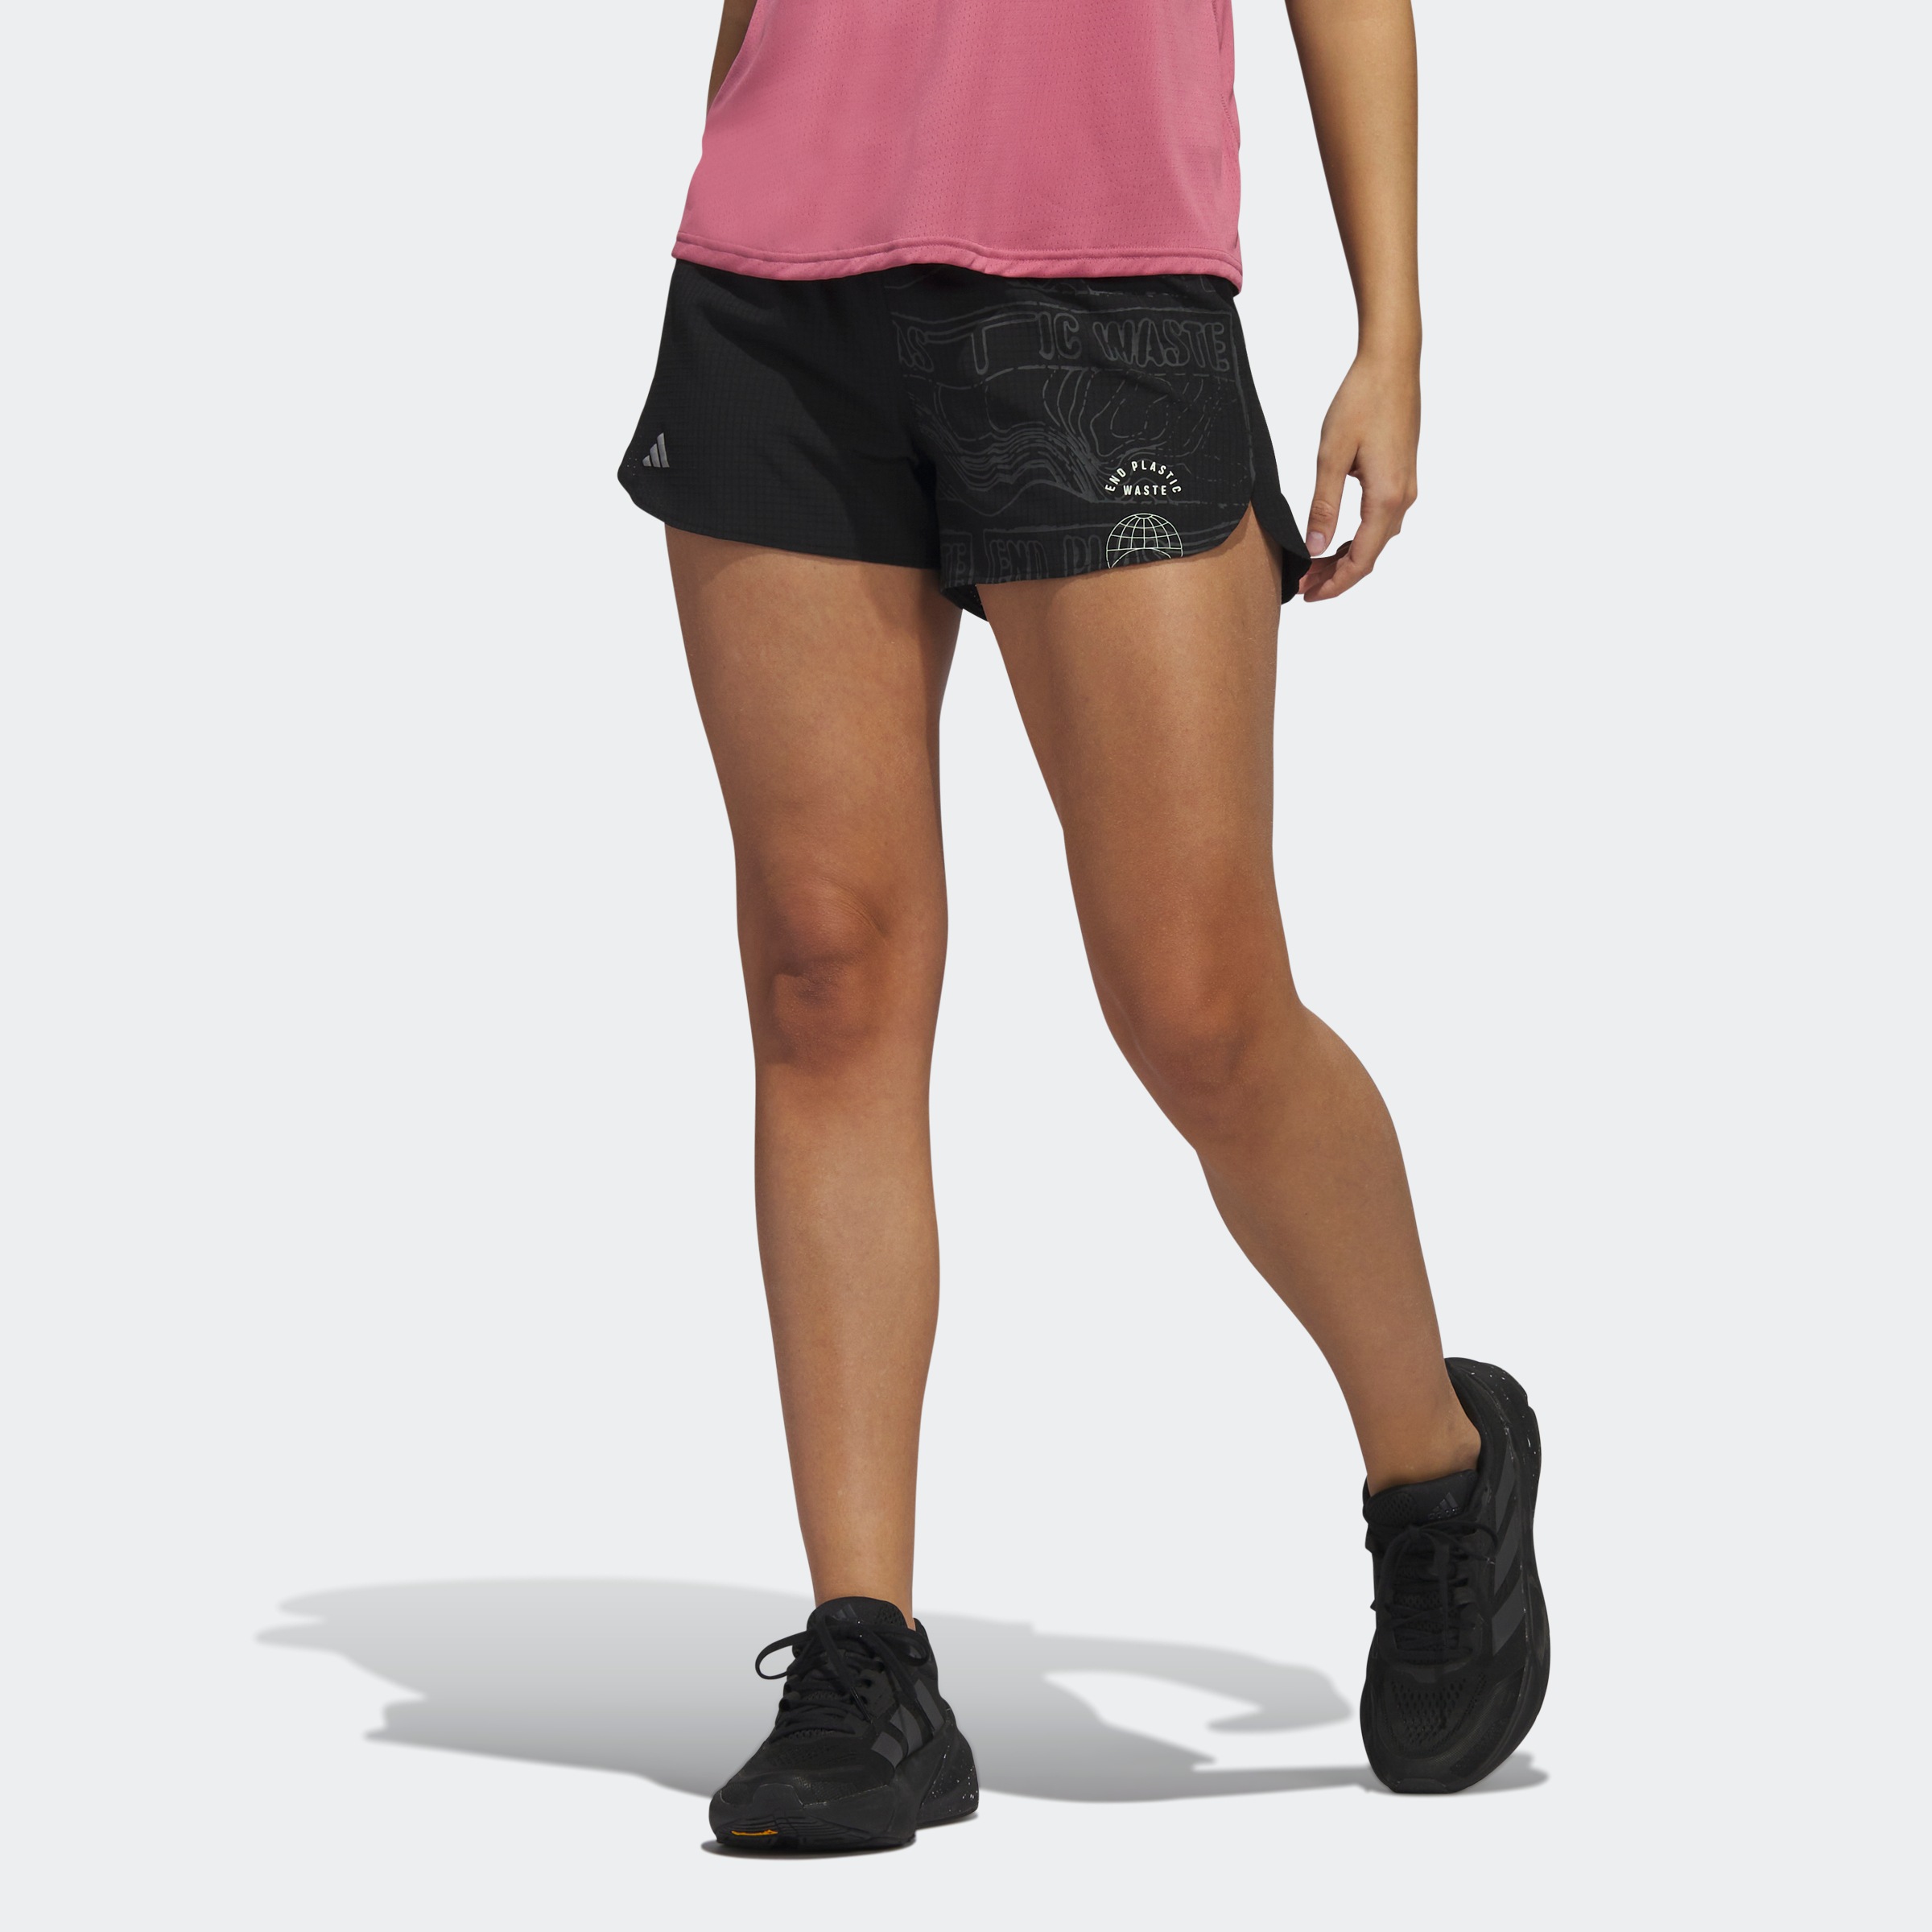 adidas FOR THE »RUN bei (1 ♕ SHORTS«, Performance tlg.) Laufshorts OCEANS